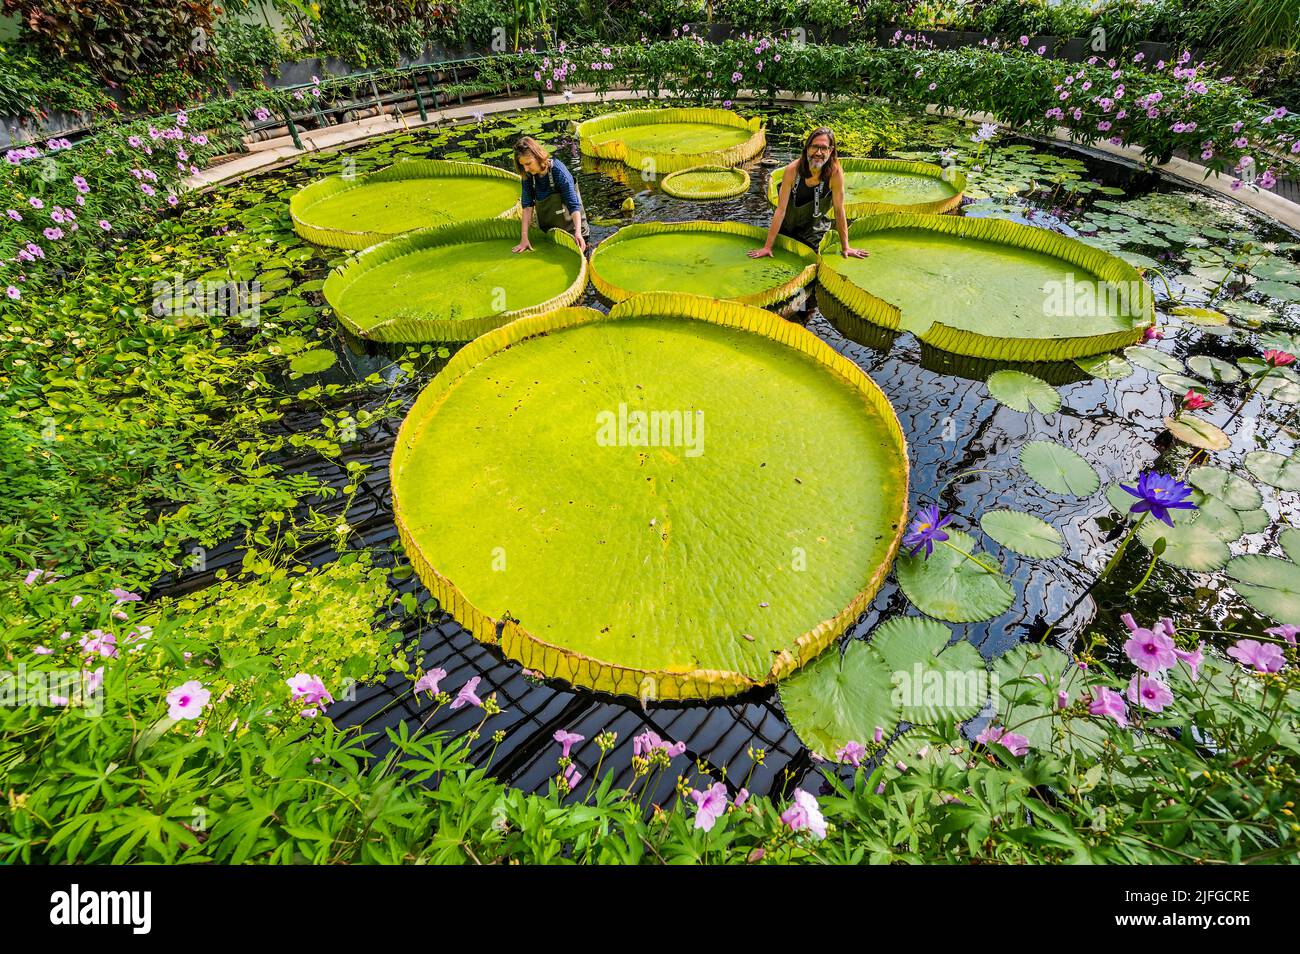 EMBARGOED till 05:00 BST Monday 4 July 2022 - London, UK. 3 Jul 2022. A giant waterlily grown in the Waterlilly House at Kew Gardens has been named, Victoria boliviana, new to science based on a paper, published today (04/07/22) in the journal Frontiers in Plant Science - condensing years of investigation, by a team headed by Kew's Carlos Magdalena (pictured), botanical artist Lucy Smith (pictured), and biodiversity genomics researcher Natalia Przelomska, alongside partners from the National Herbarium of Bolivia, Santa Cruz de La Sierra Botanic Garden and La Rinconada Gardens. Victoria bolivia Stock Photo